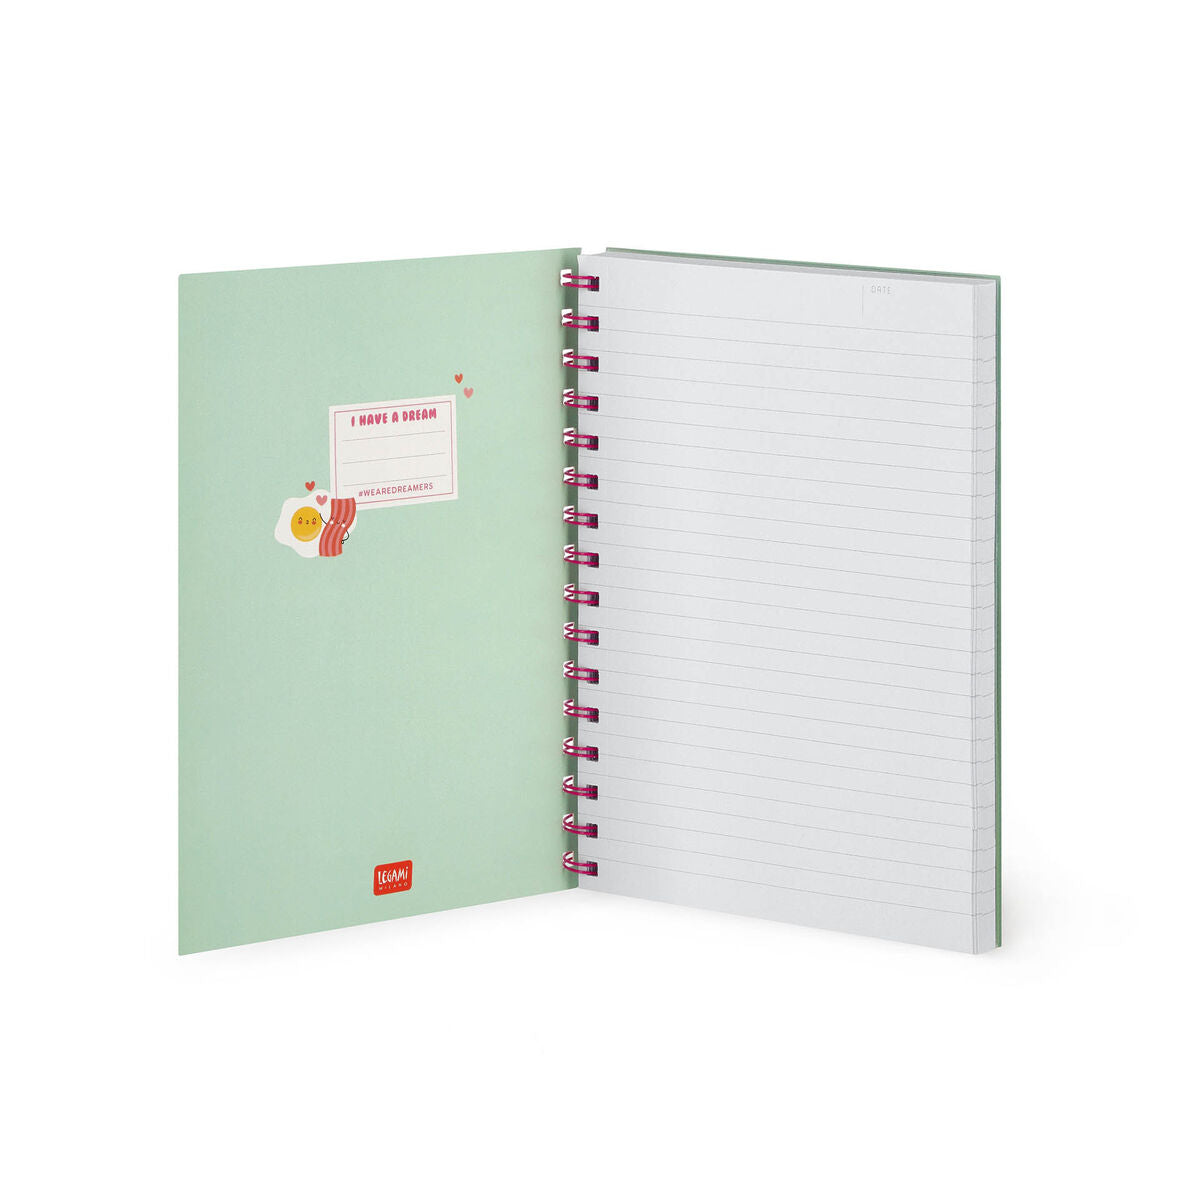 Notebooks - Legami A5 Spiral Notebook Large Lined- Egg by Weirs of Baggot Street